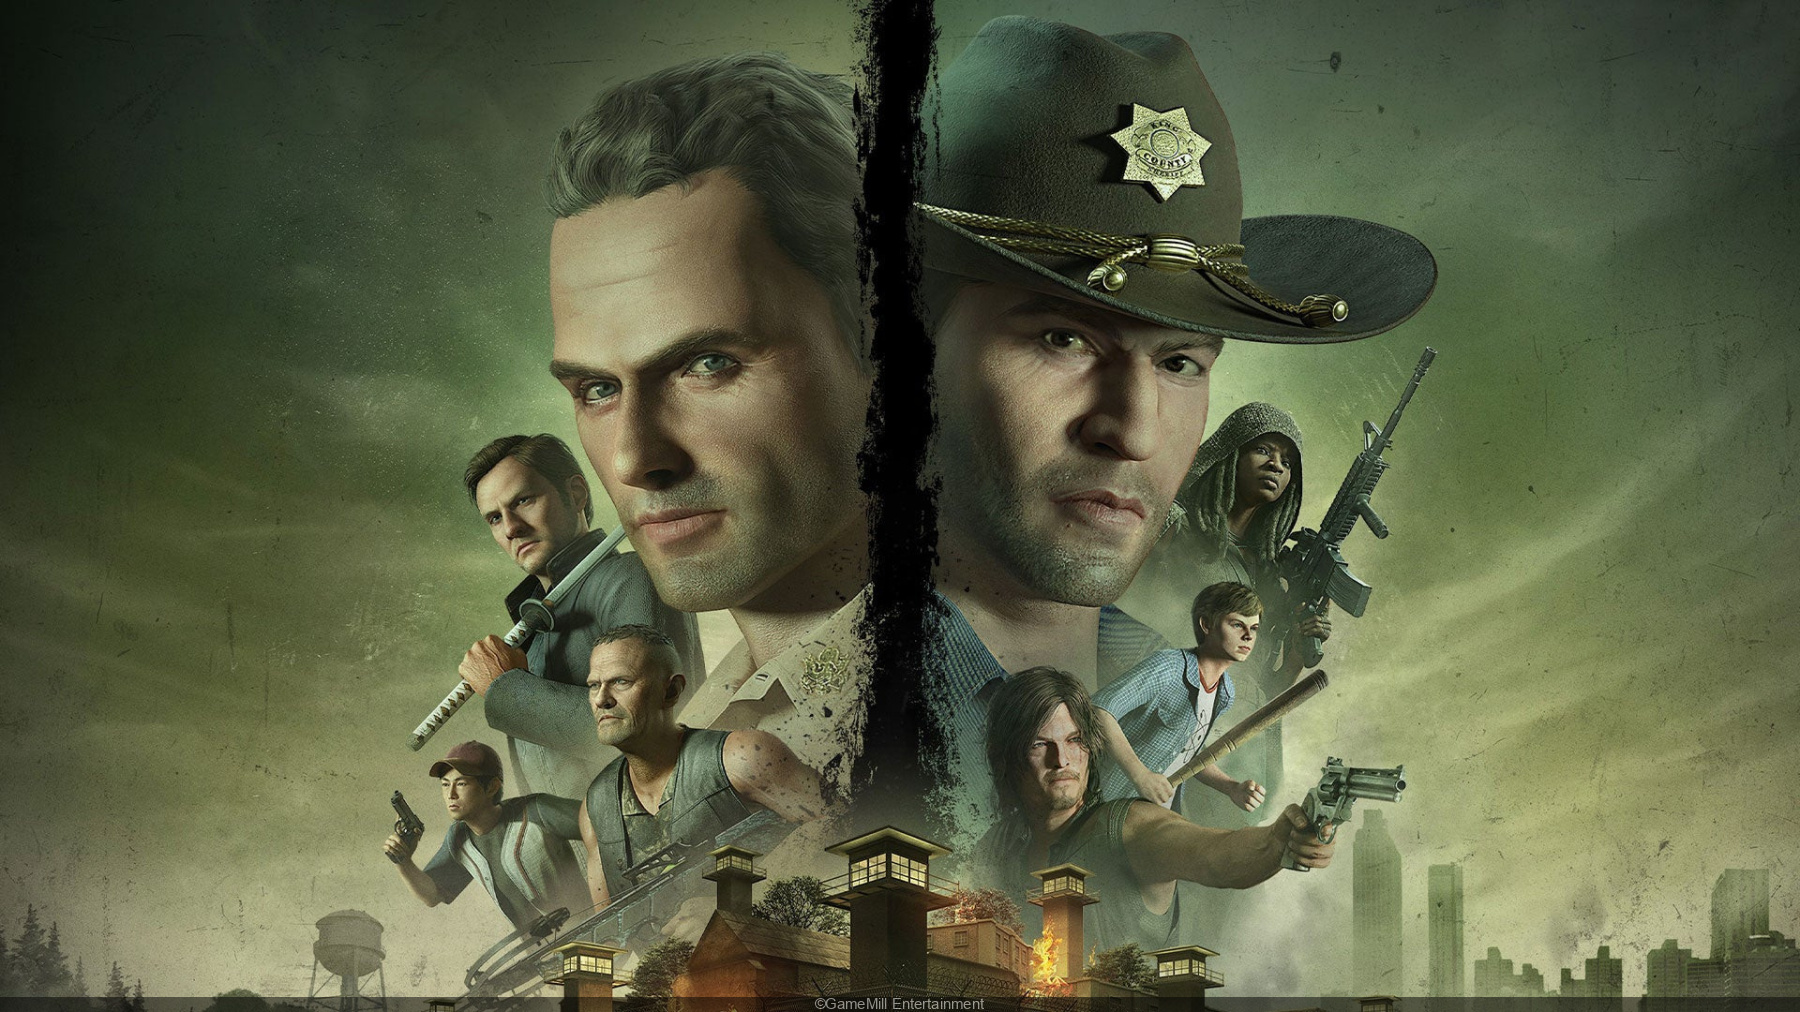 The Walking Dead Game Of The Year Edition Available On PS3, Xbox 360, PC